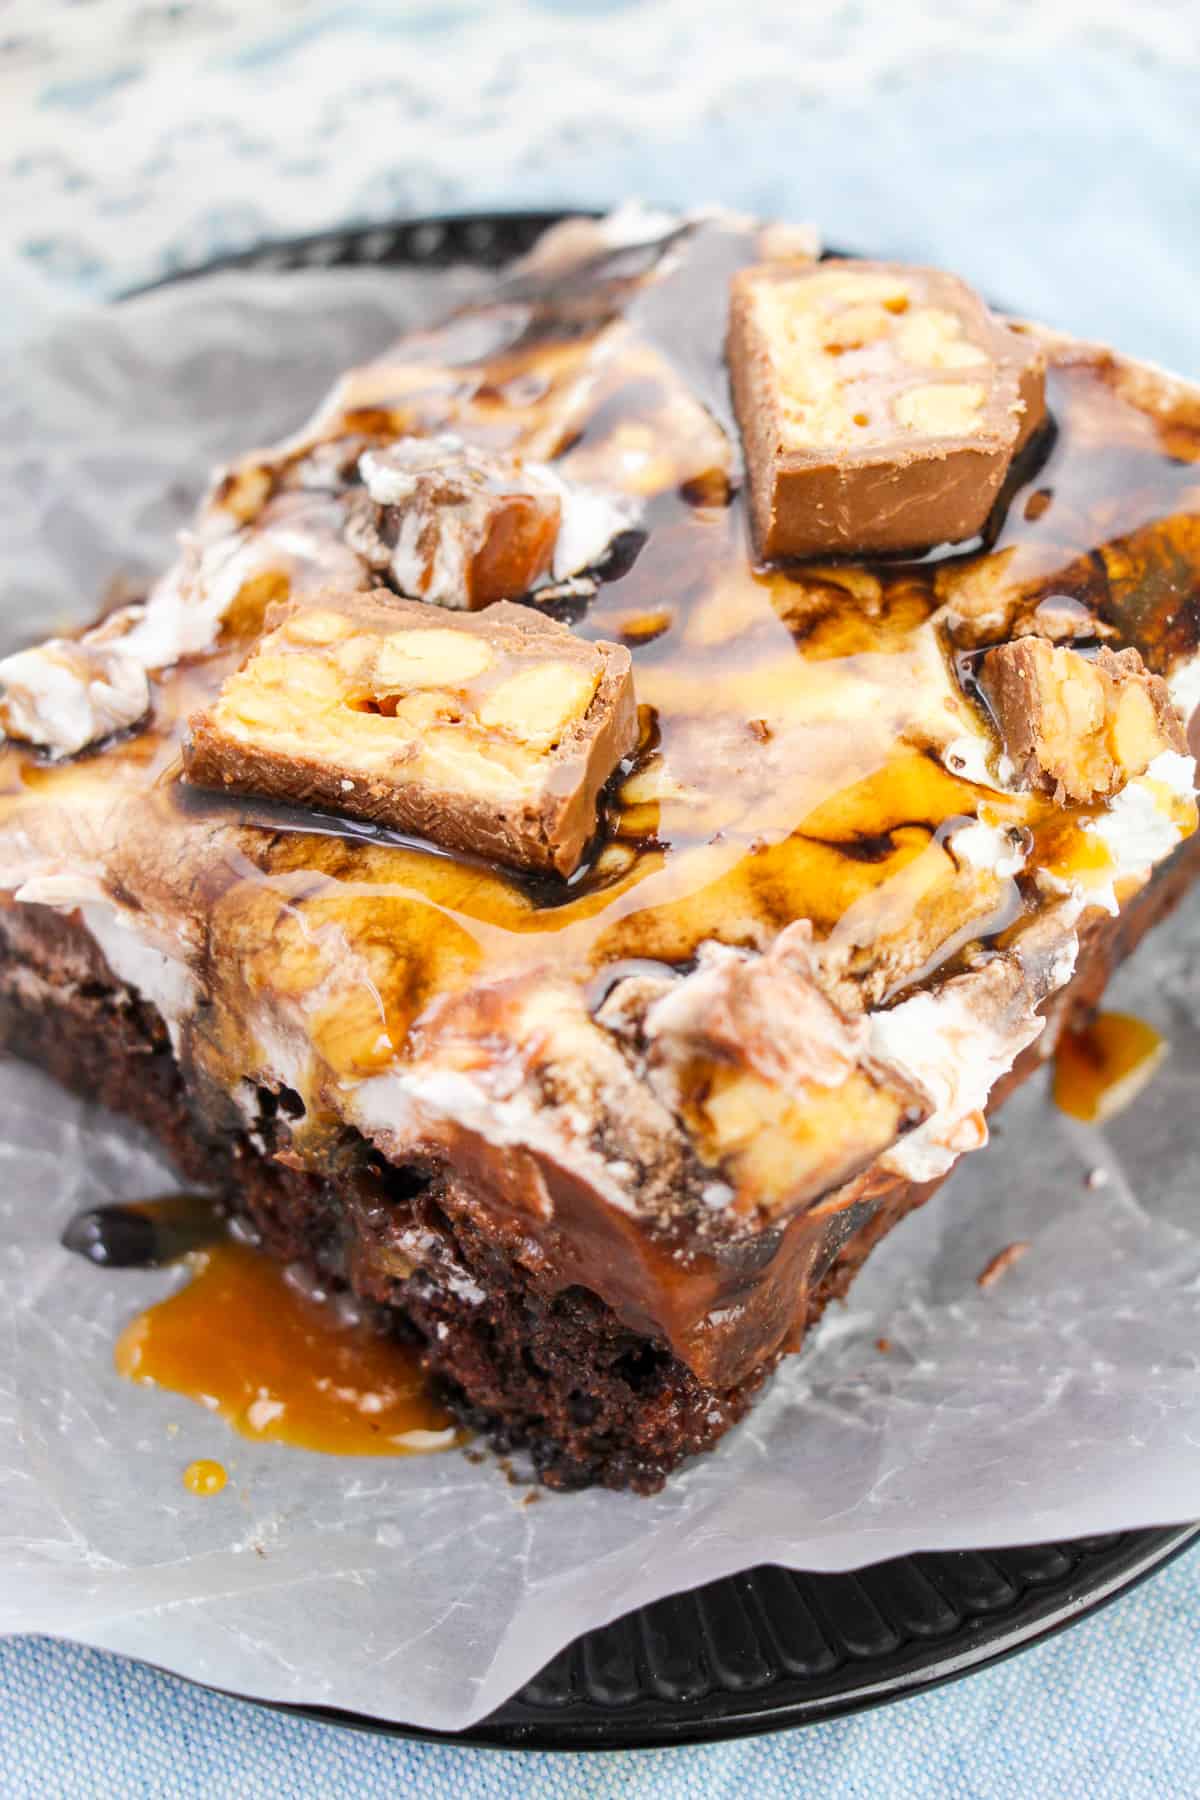 Snickers chocolate cake with whipped topping and chocolate and caramel sauces drizzled on top.